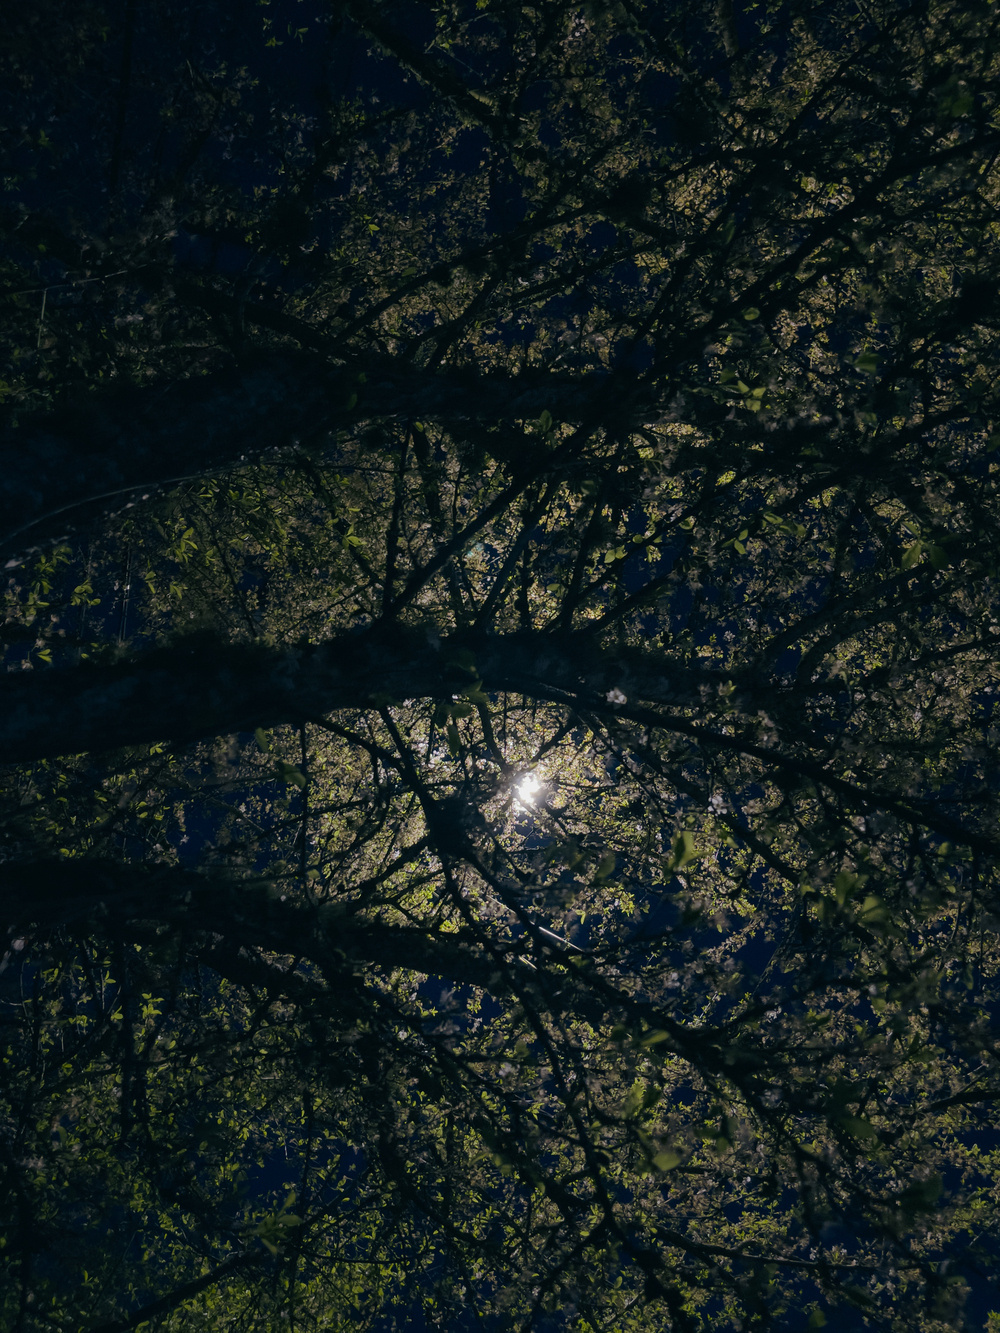 Tree branches illuminated by street light above. Light source visible through branches.